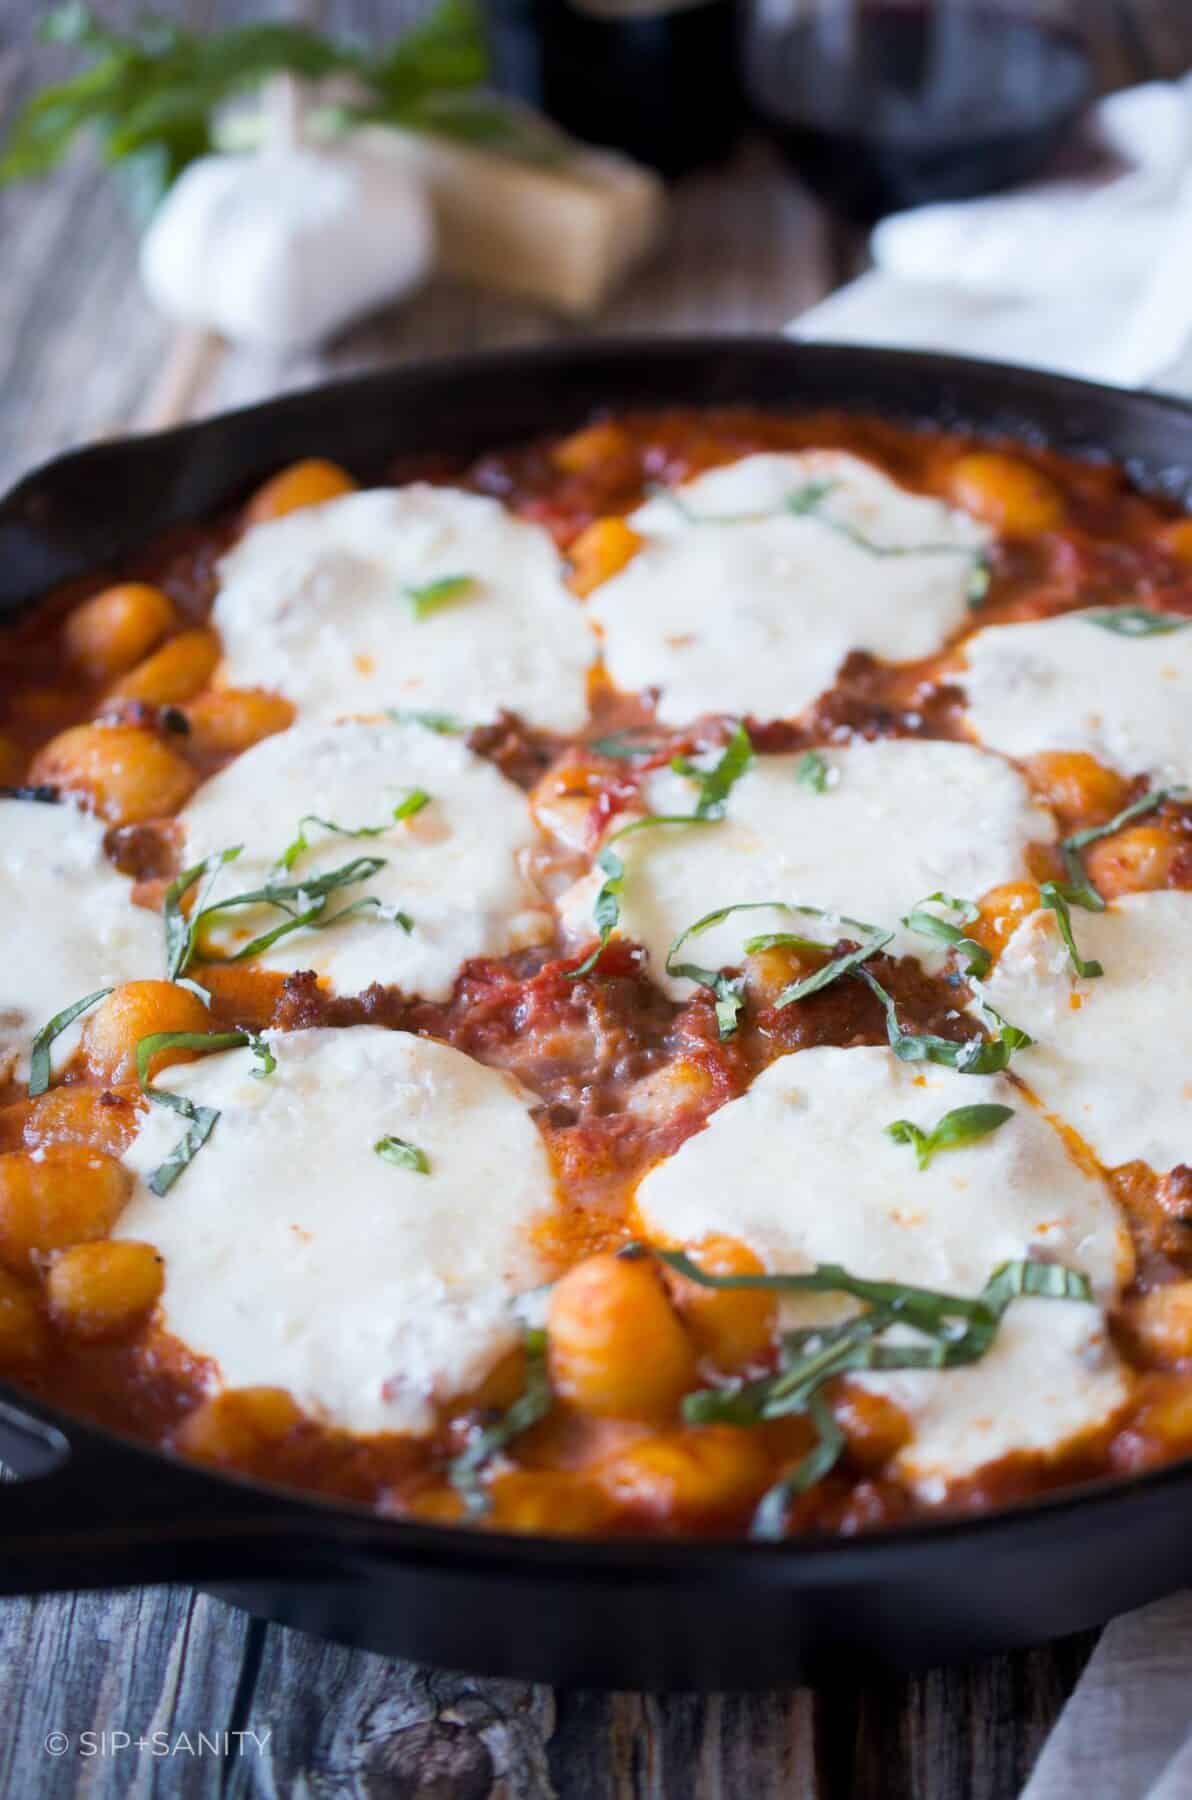 A cast iron skillet filled with gnocchi and sausage ragu with melted mozzarella and shredded basil on top.